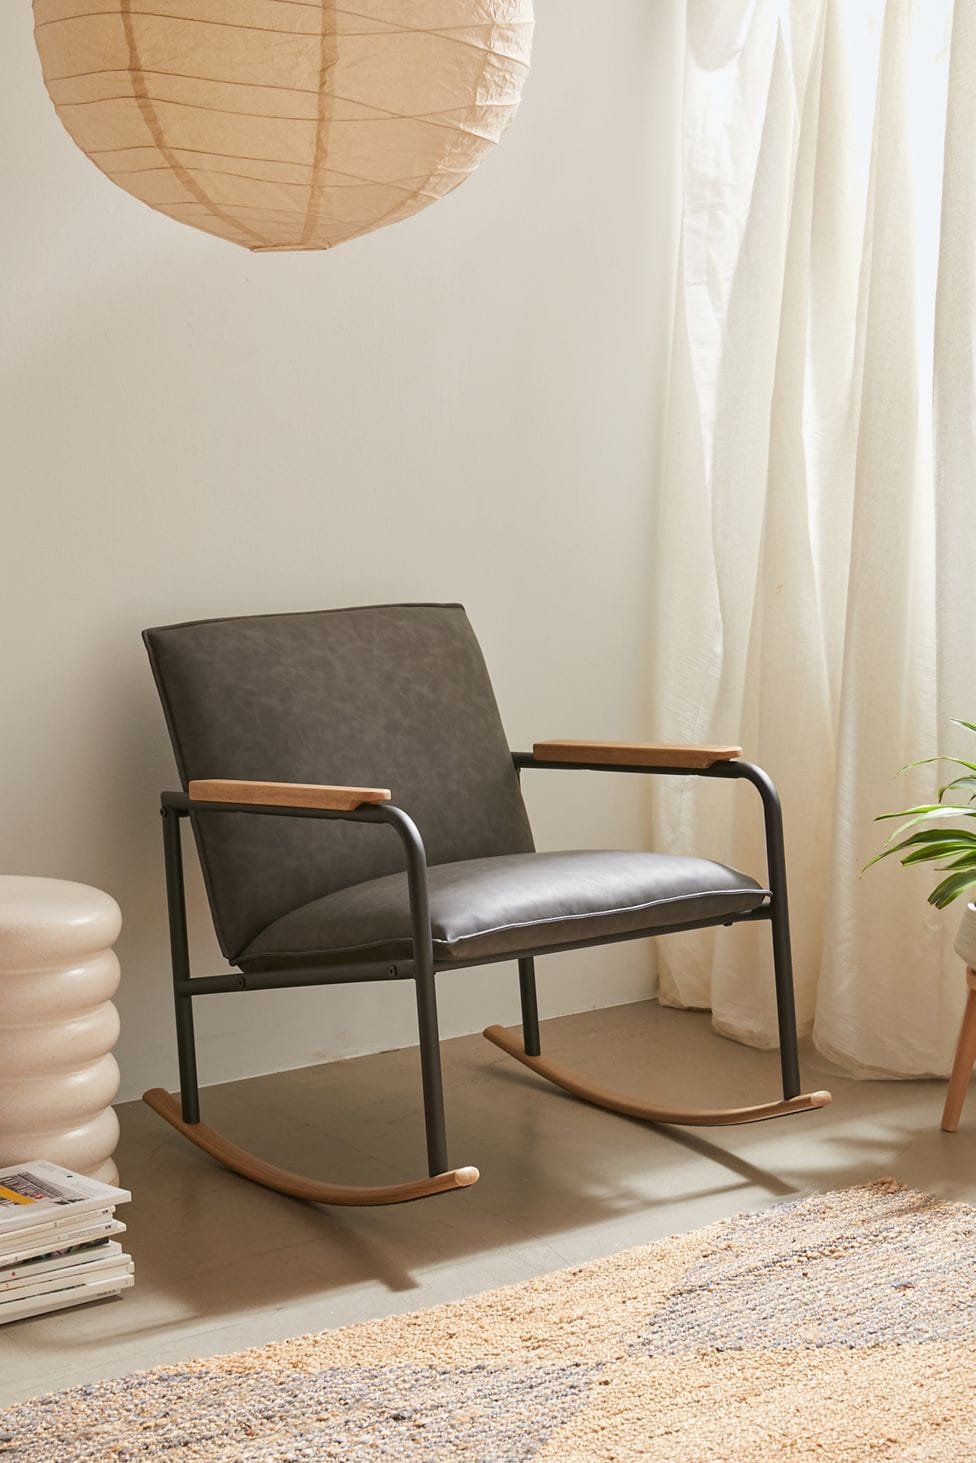 Keep it Simple with a Small Rocking Chair